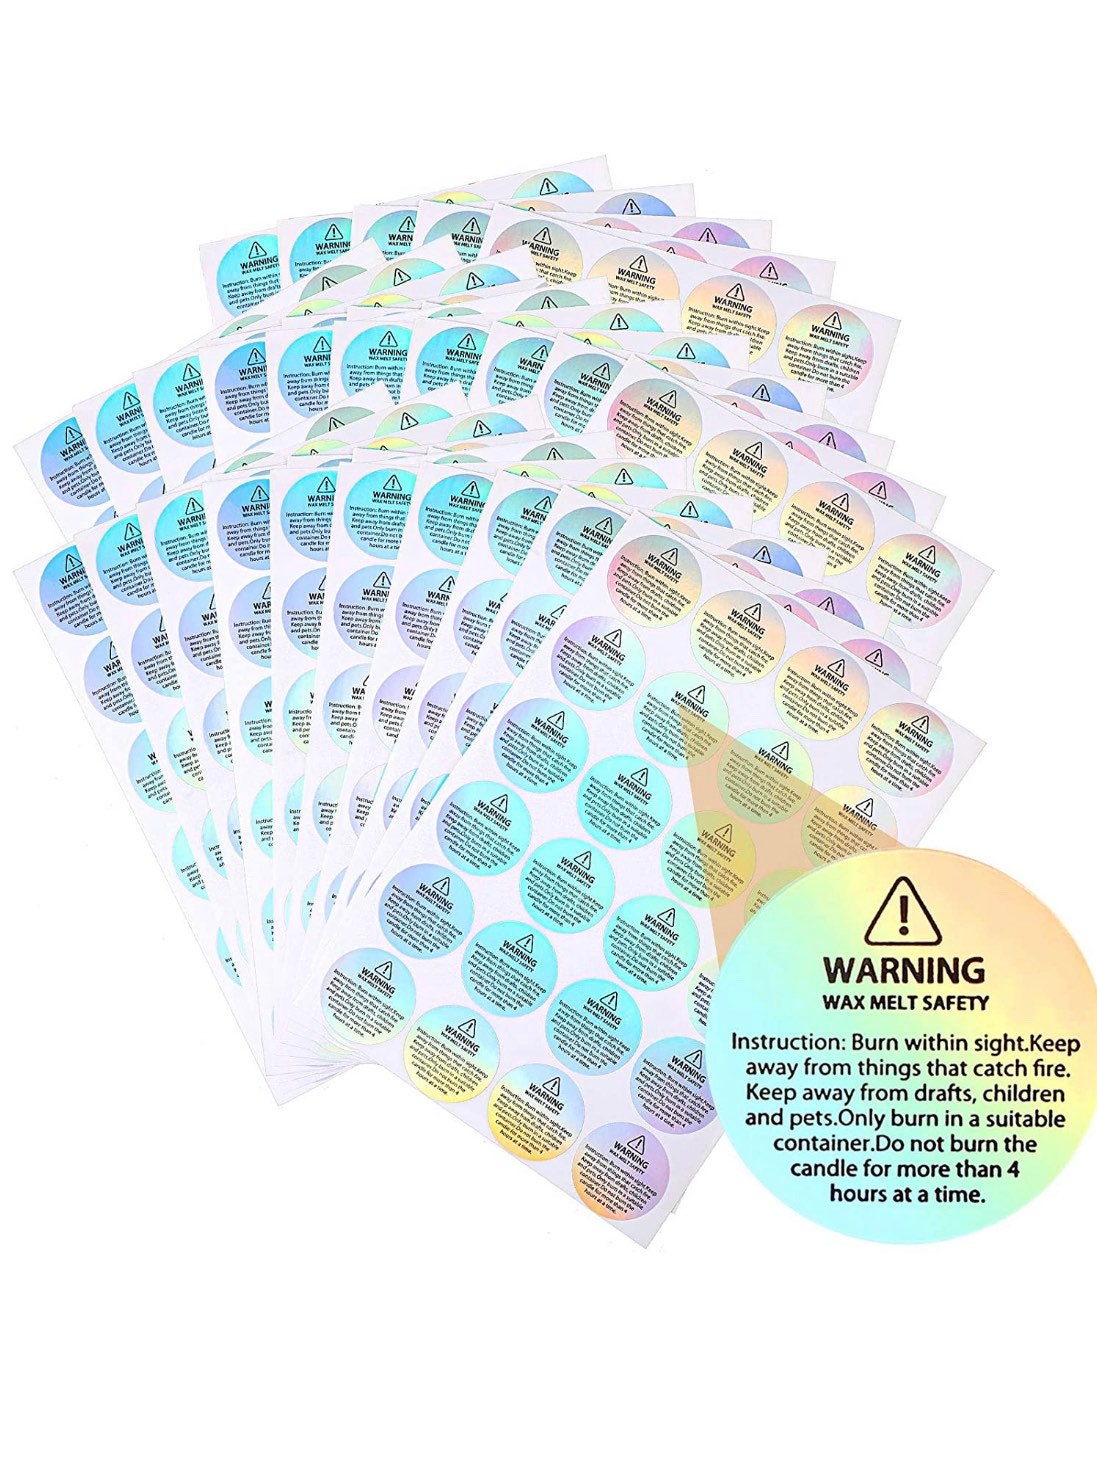 Candle Labels Safety Stickers Warning Sticker Label Waterproof Decal  Container Melting Wax Jar Votives Tins Jars